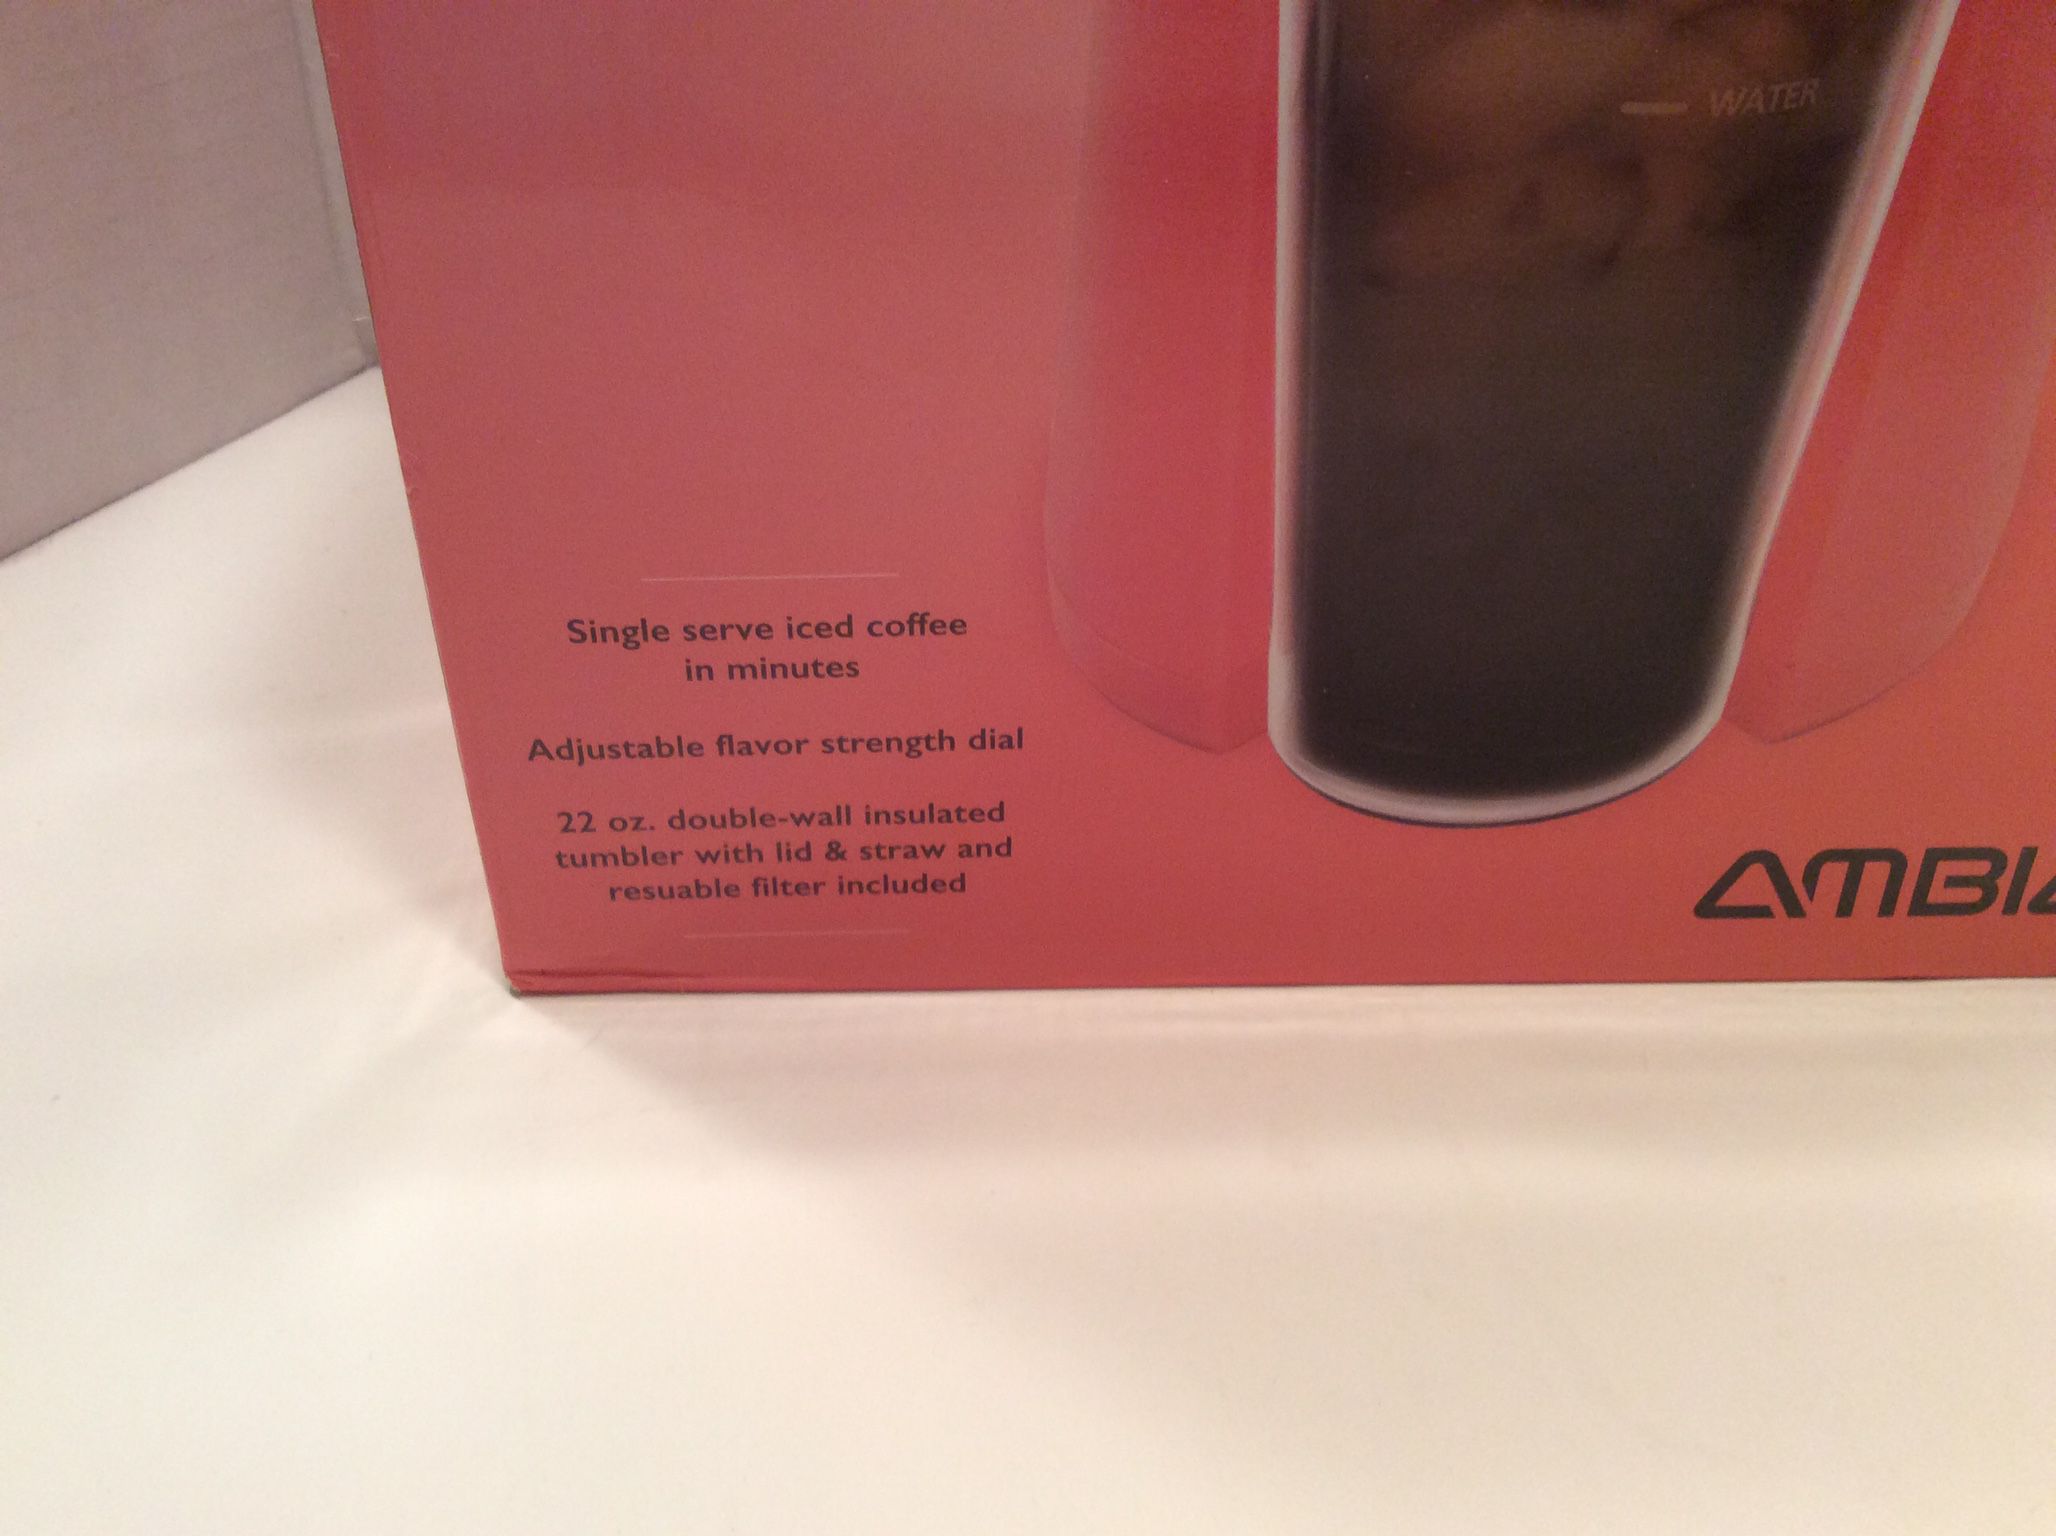 Single Serve Pink Iced Coffee Maker By Ambiano New for Sale in Gulfport, FL  - OfferUp